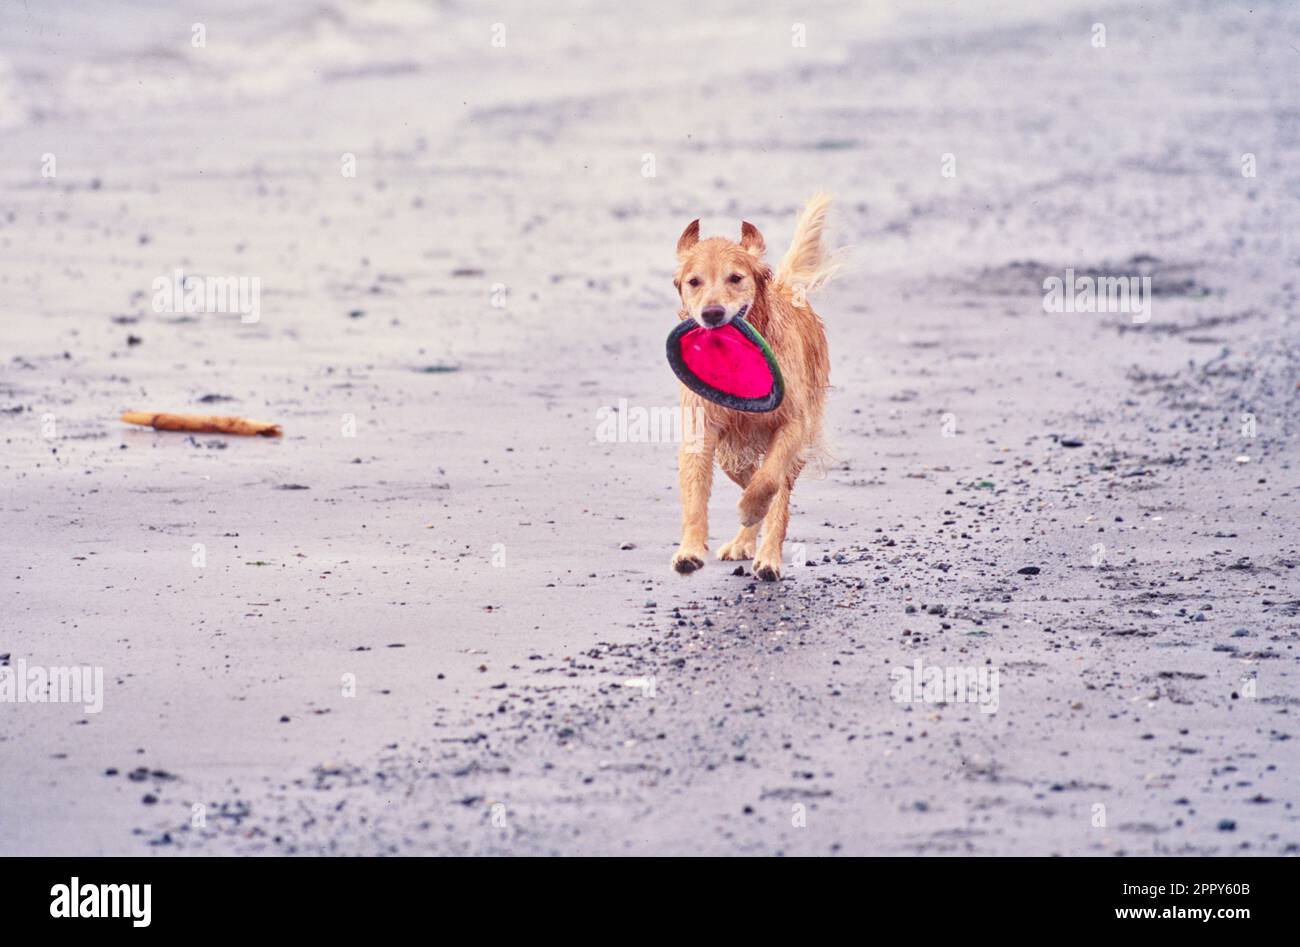 Golden retriever racing down beach shore outside with frisbee toy in mouth Stock Photo